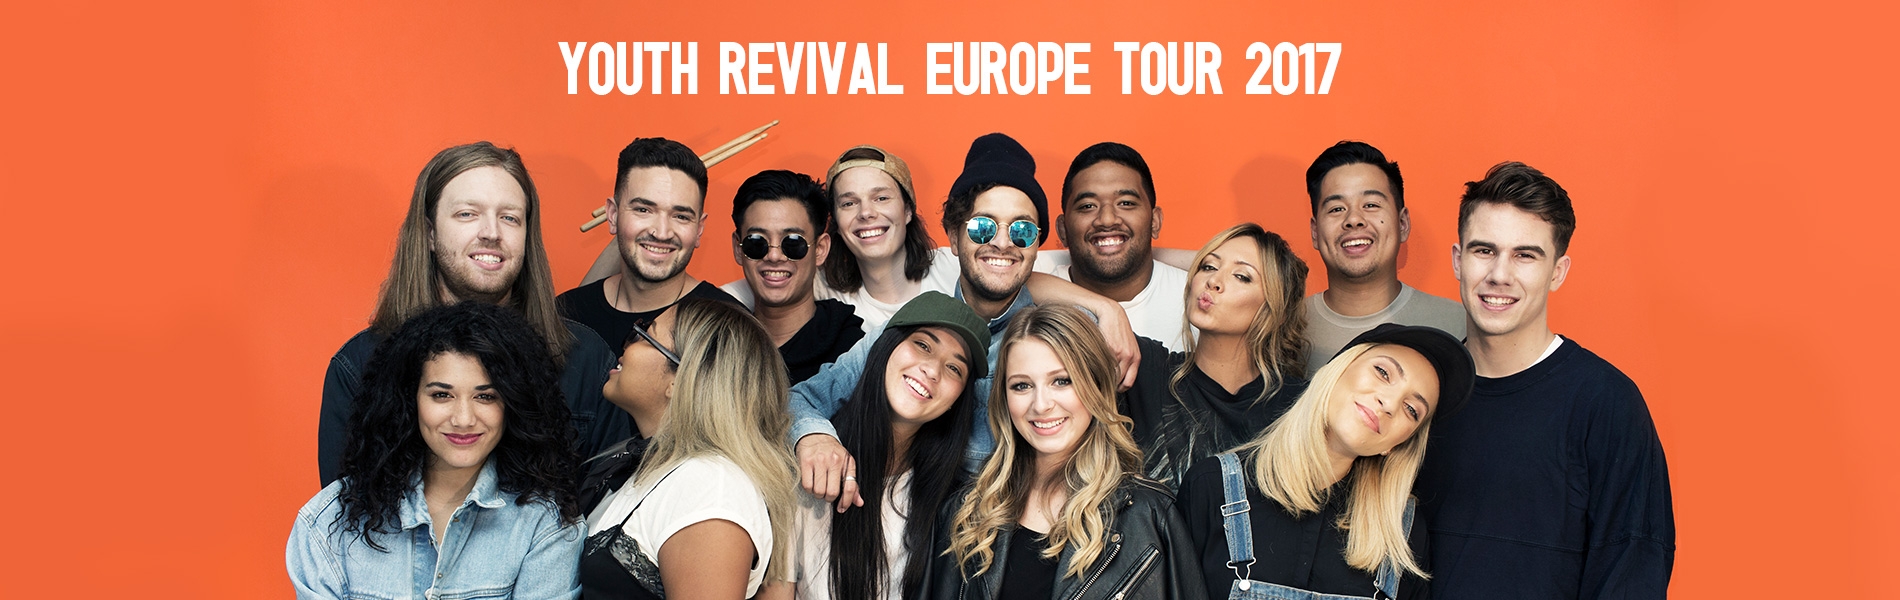 Hillsong Young & Free Youth Revival Tour Tickets cvents